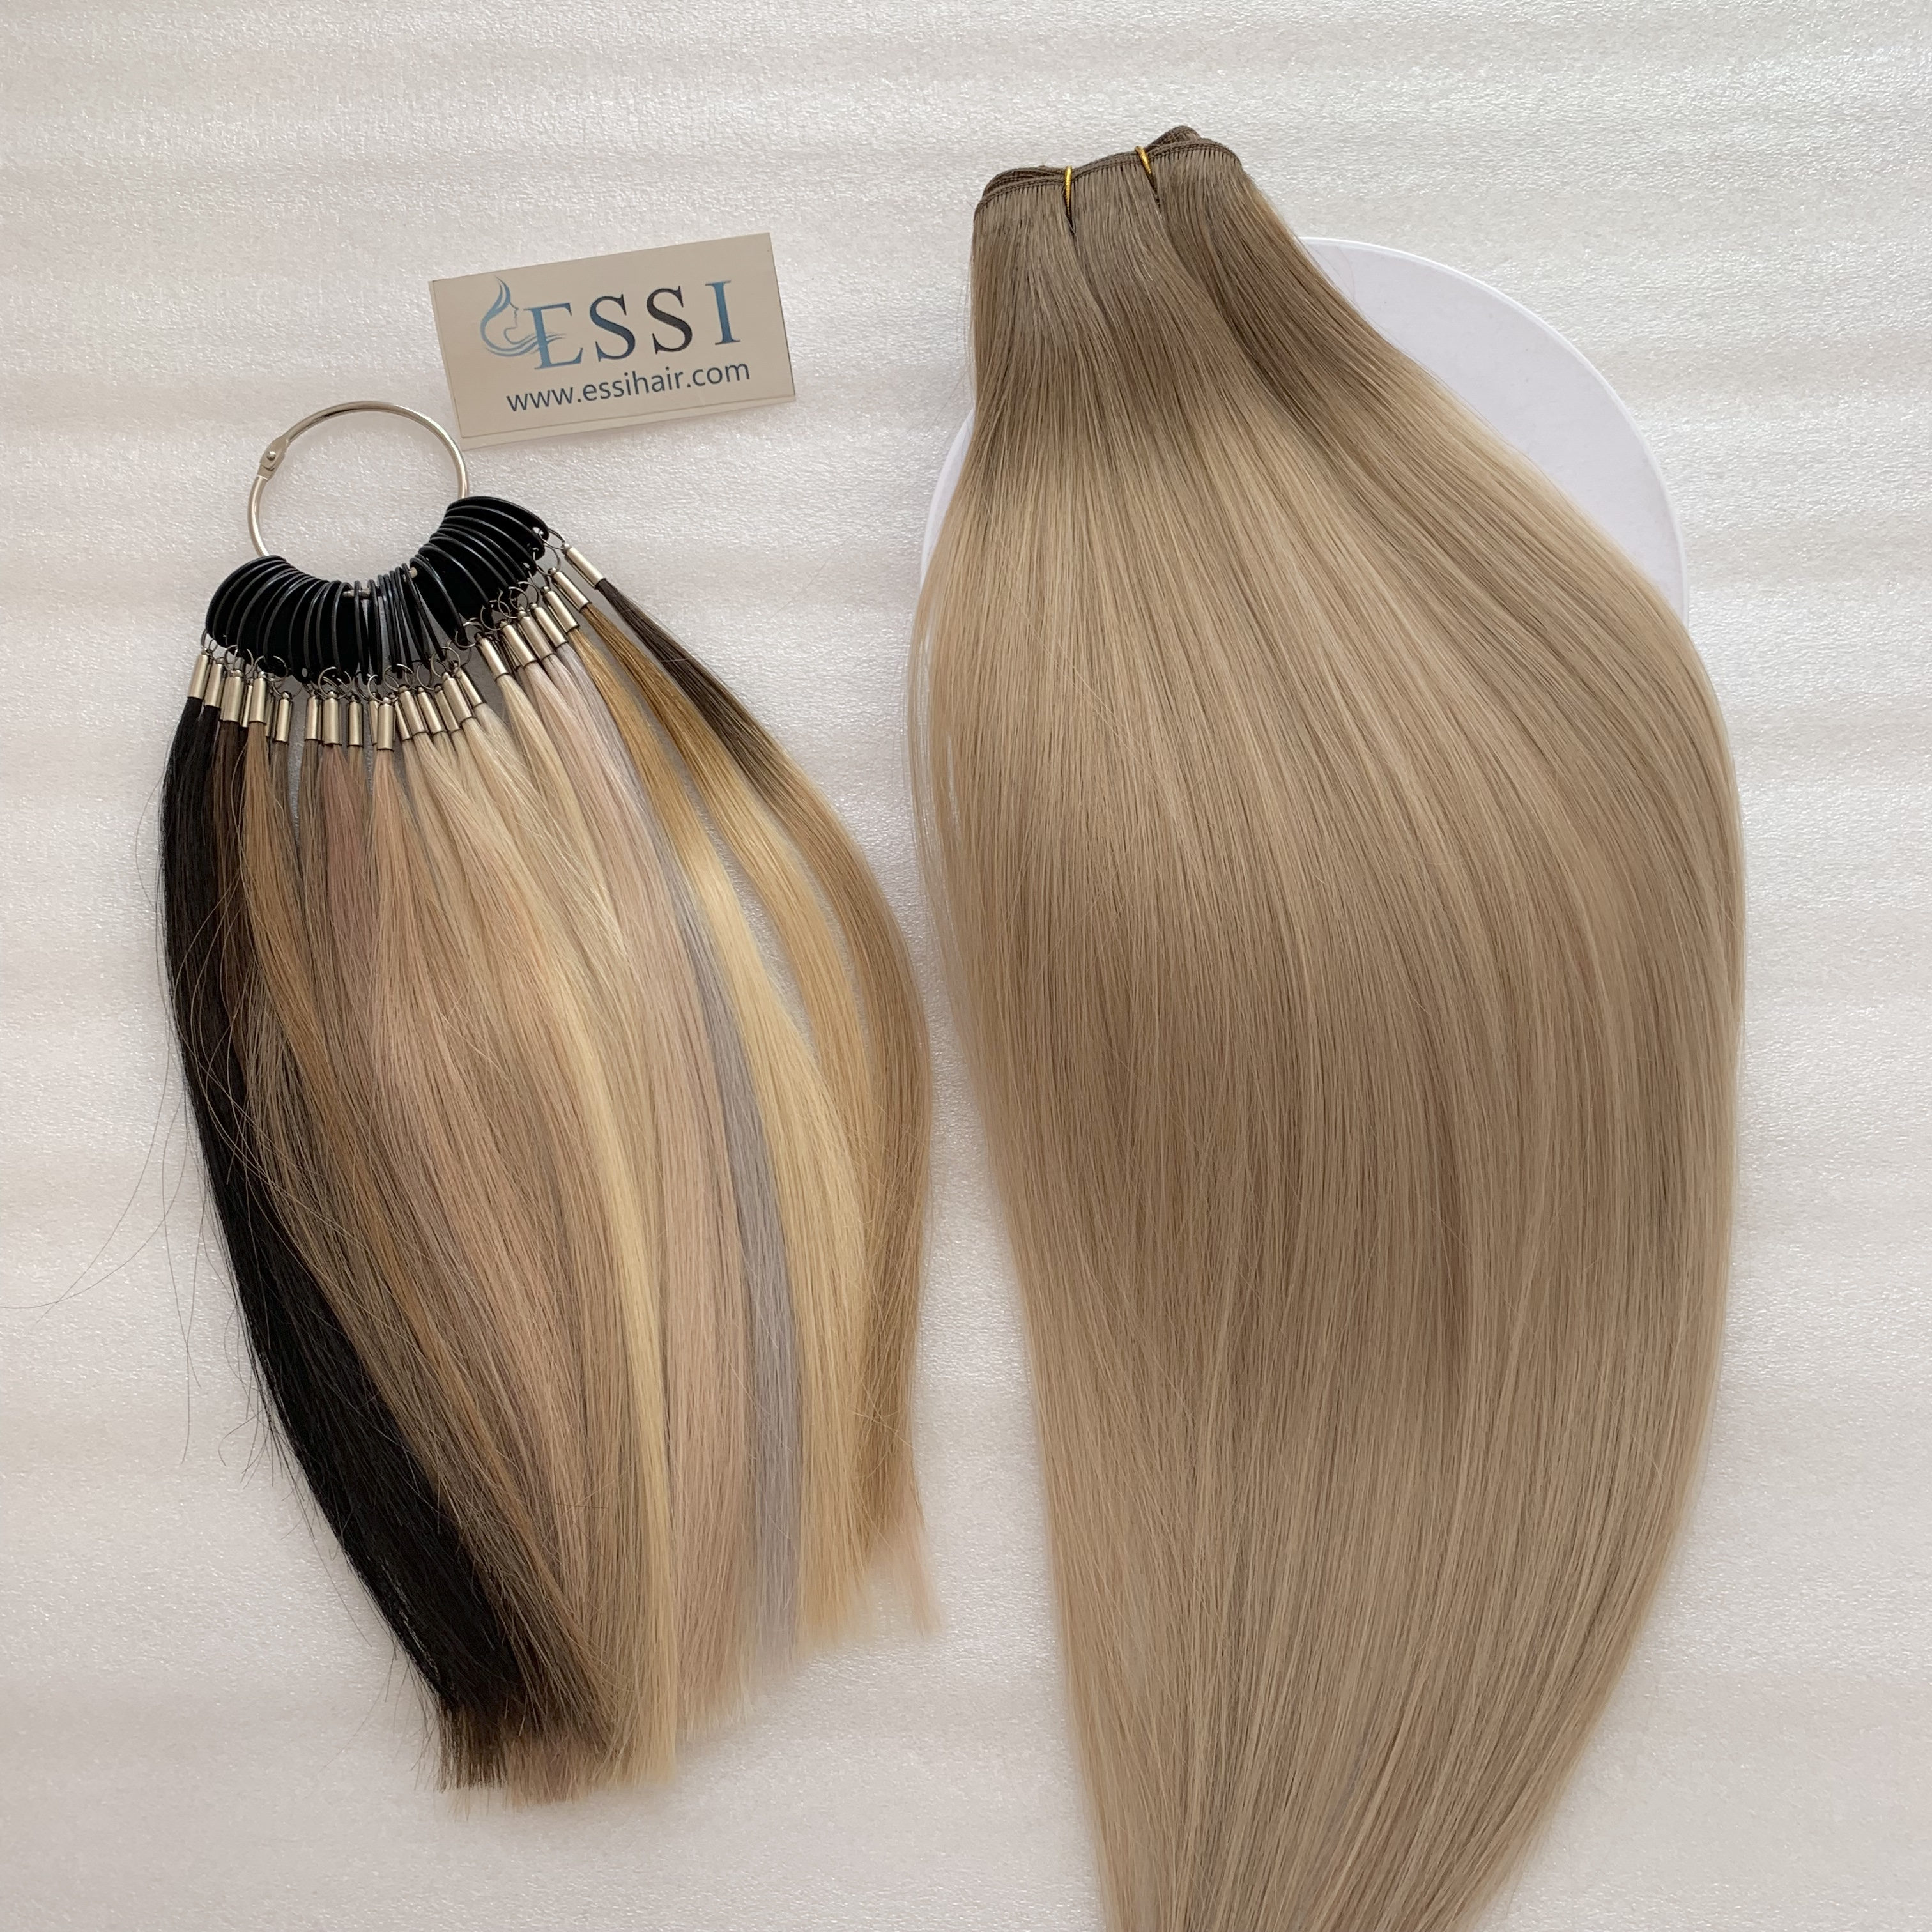 Most Fashionable Popular New Arrivals Ombre Black Root 1B Grey Brazilian Malaysian Chinese Hair Body Wave Straight Hair Extension 